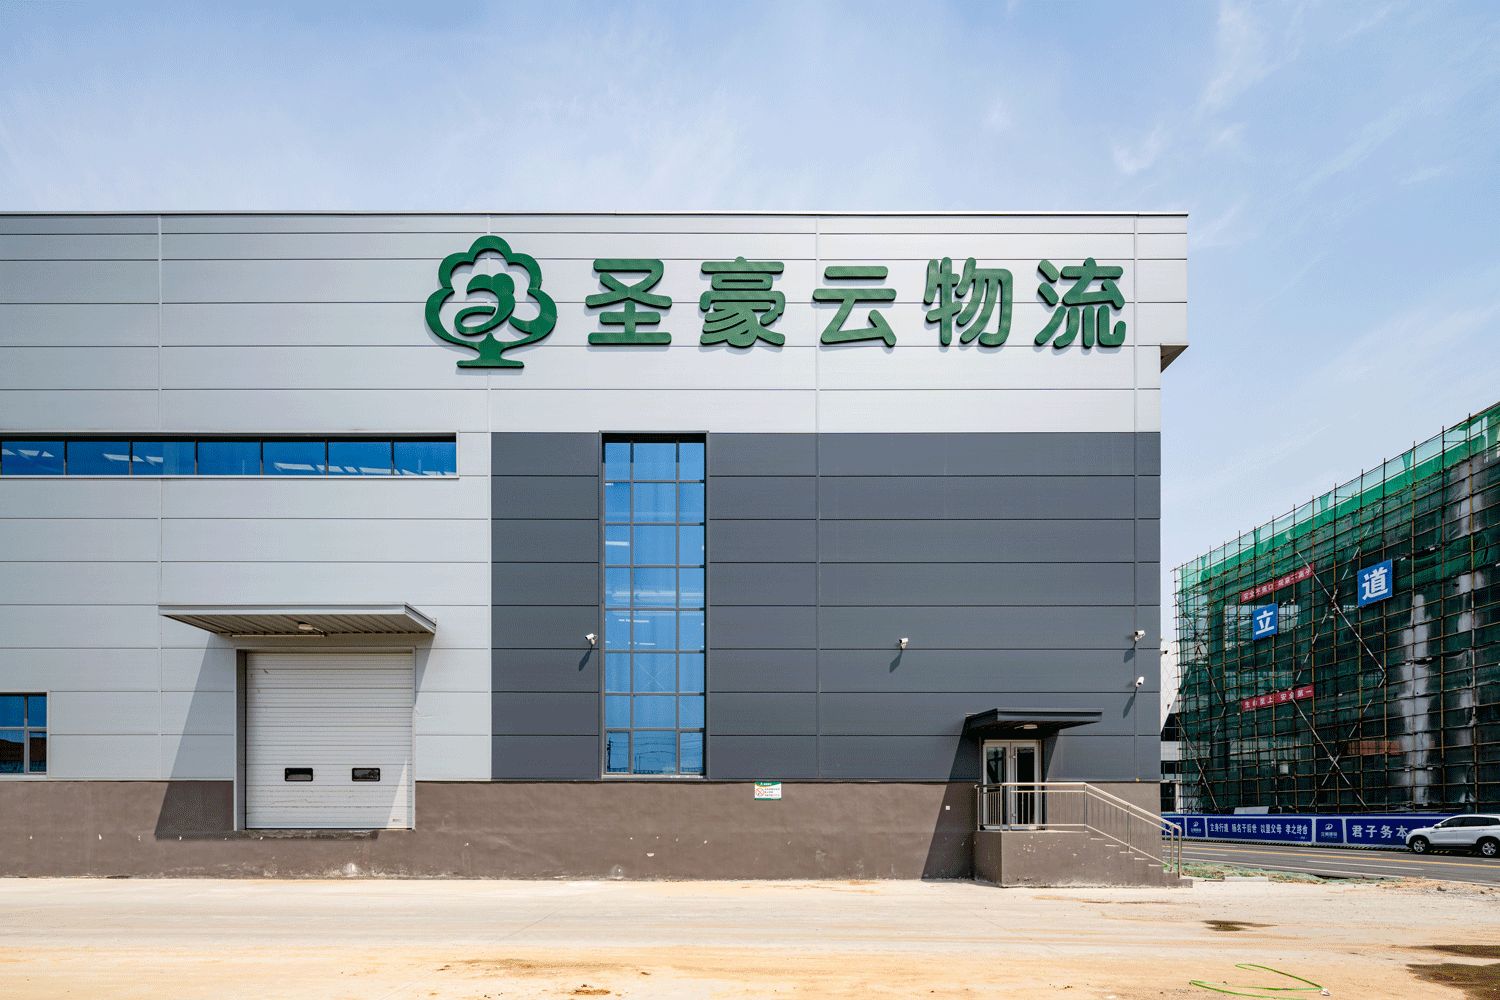 With equal emphasis on function and beauty, green building materials help the construction of logistics center(图10)